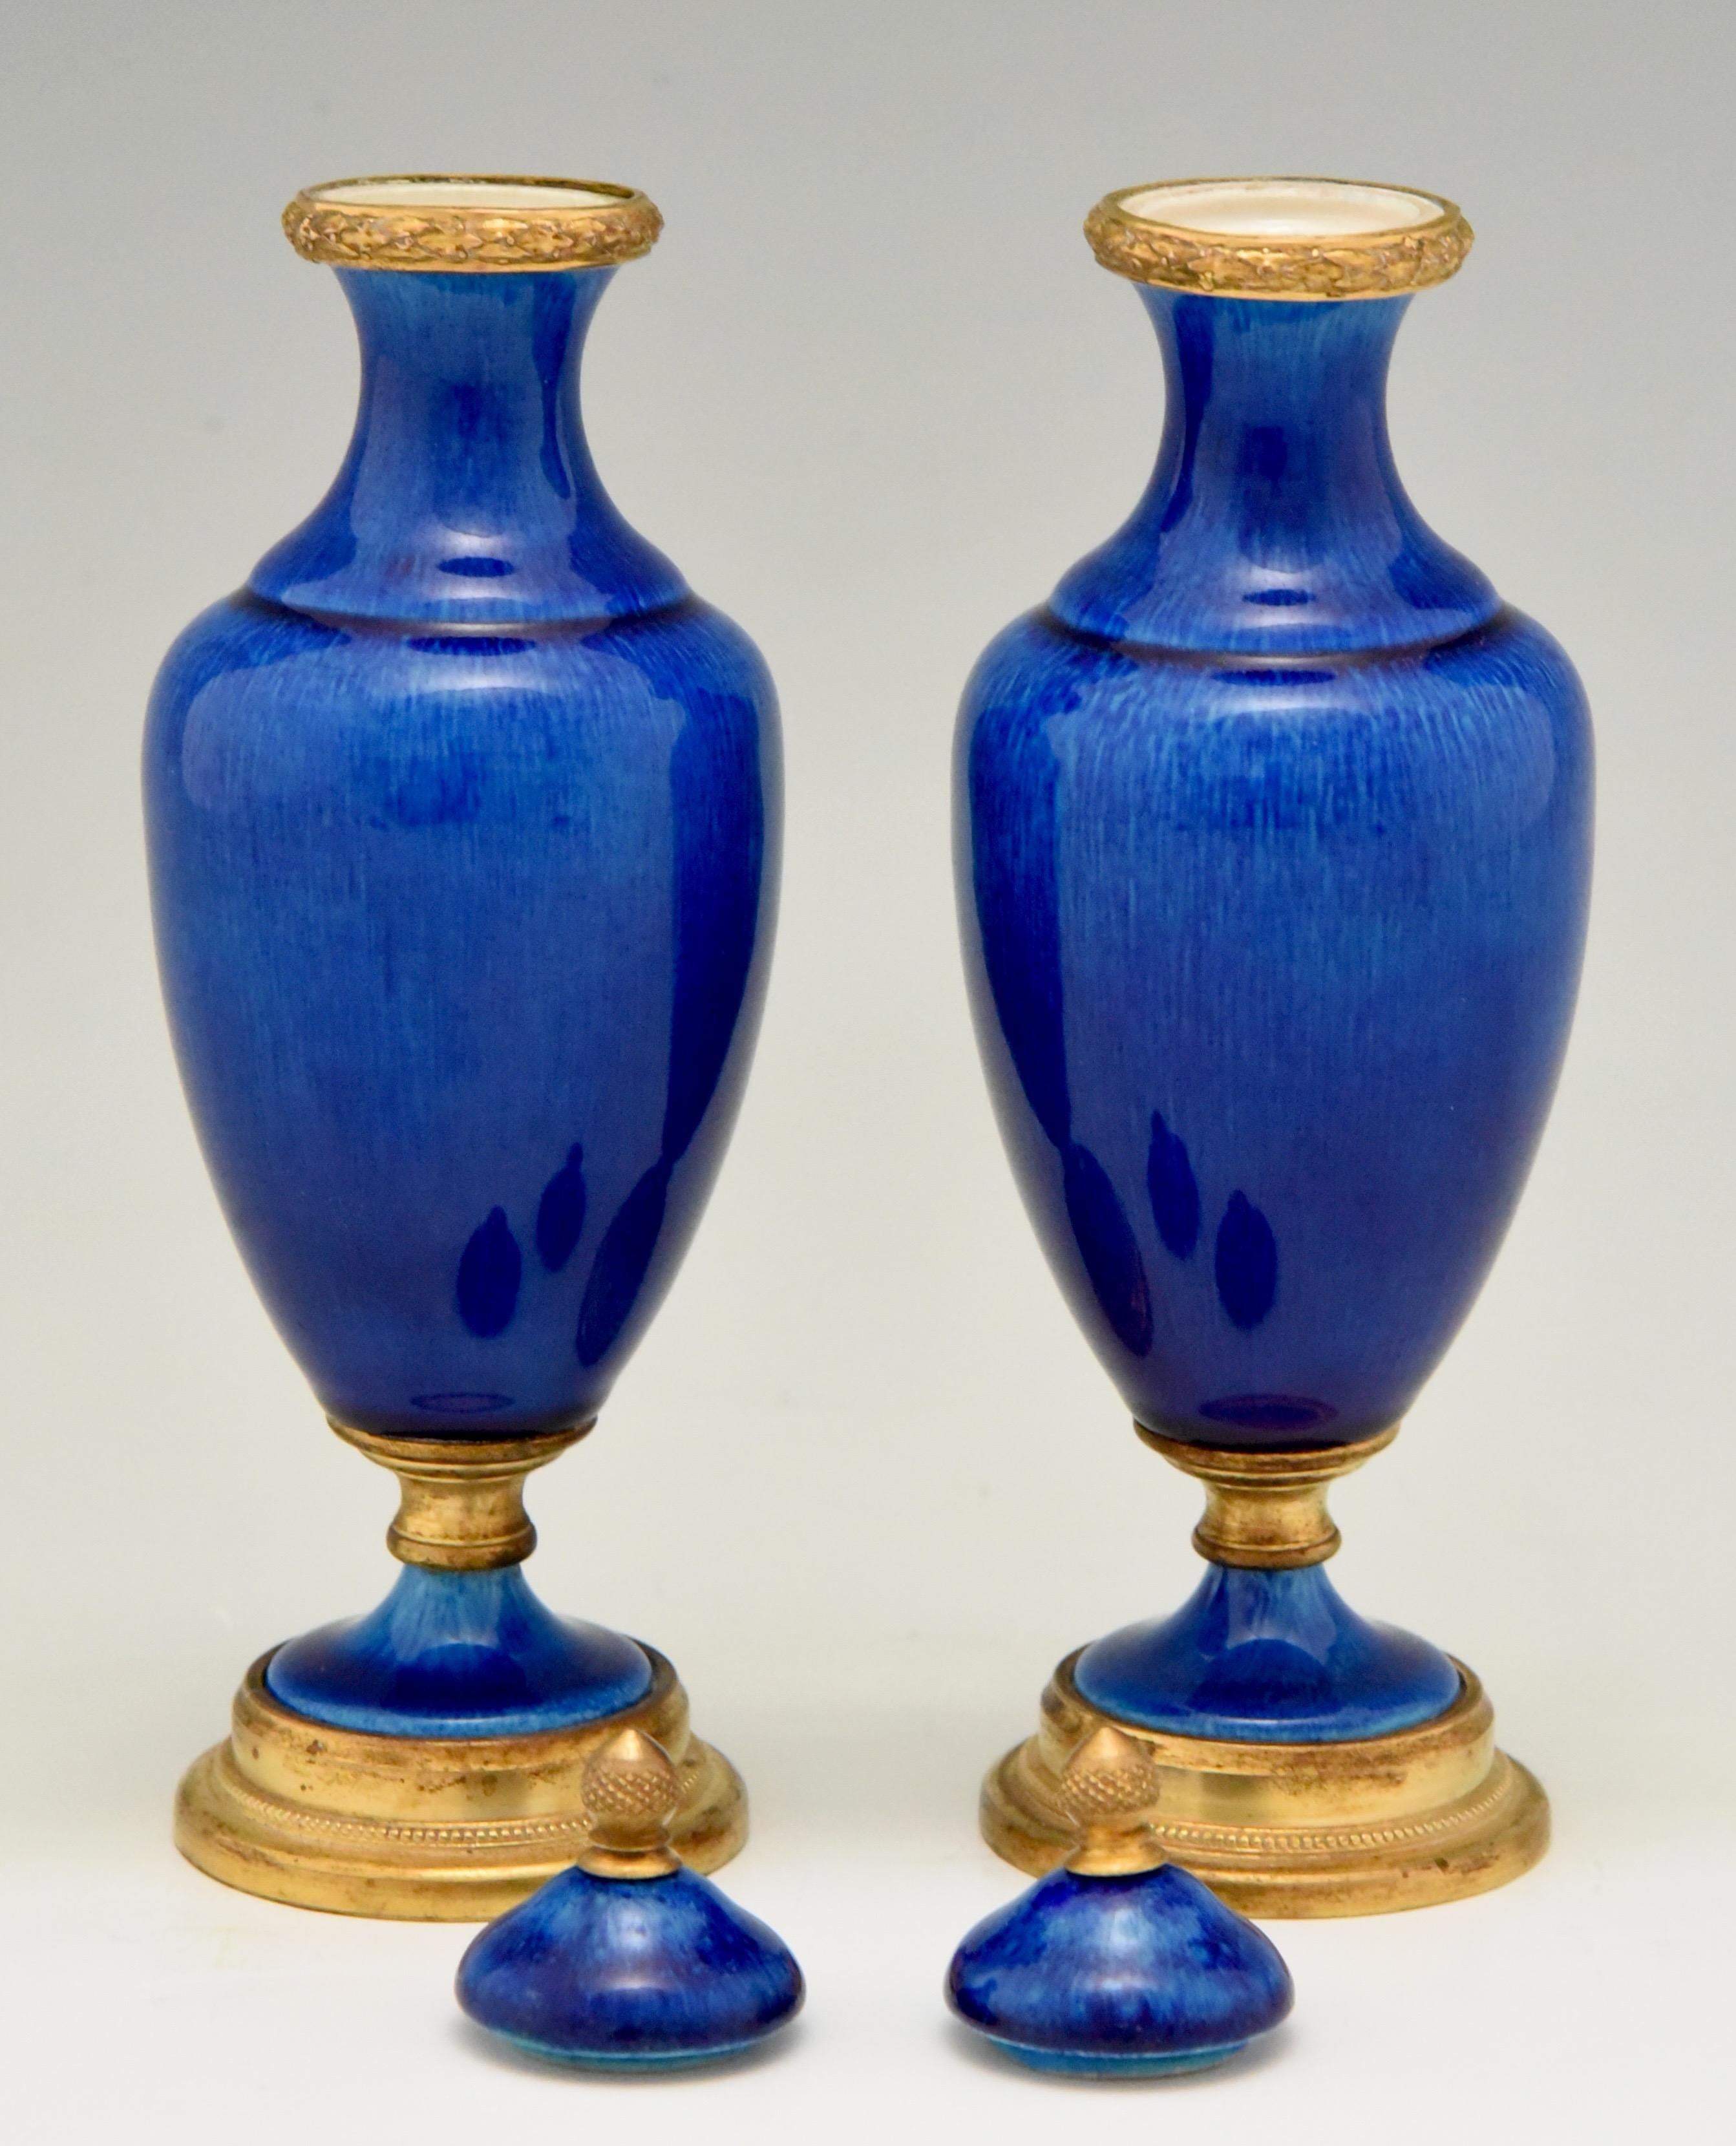 Neoclassical Pair of Blue Ceramic and Bronze Vases or Urns Paul Milet for Sèvres, circa 1900